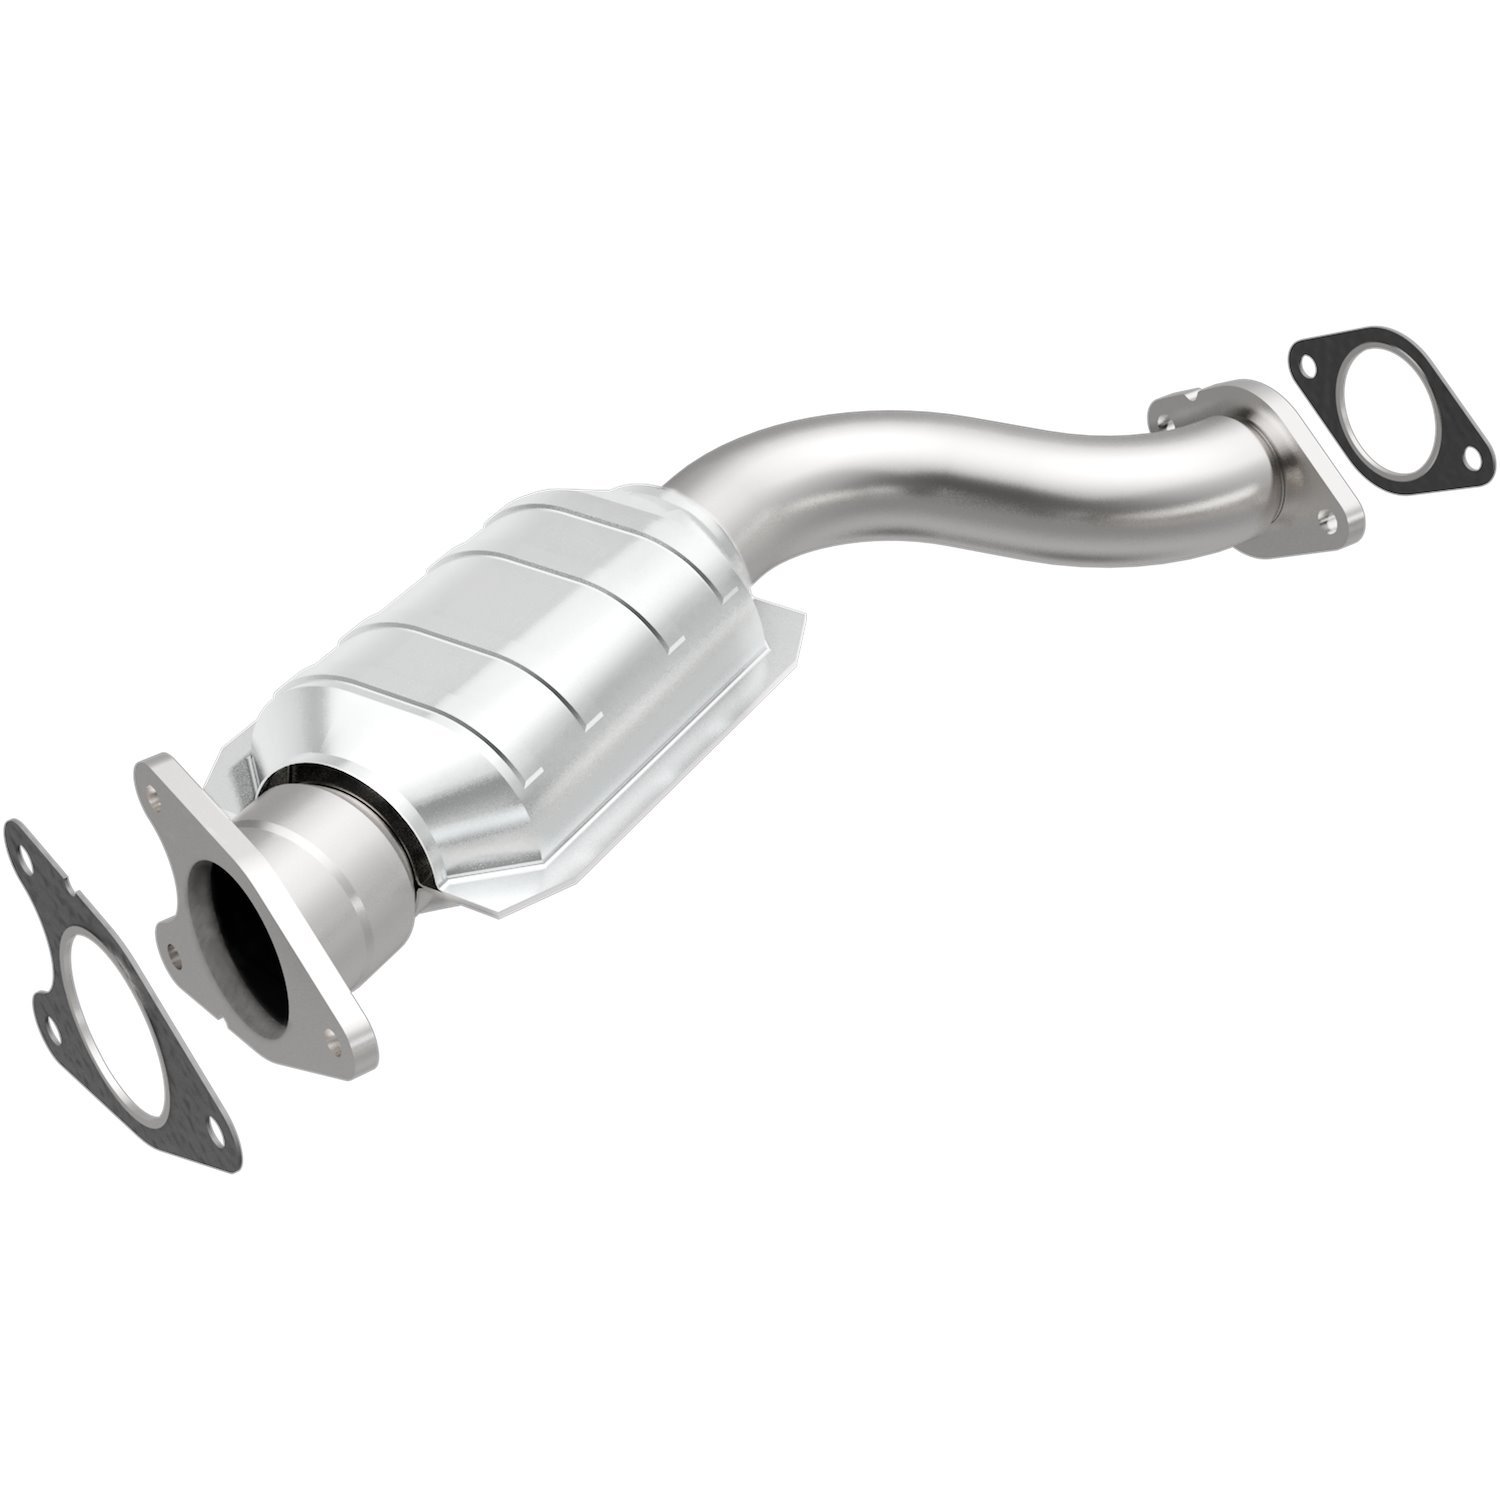 California Grade CARB Compliant Direct-Fit Catalytic Converter 457028